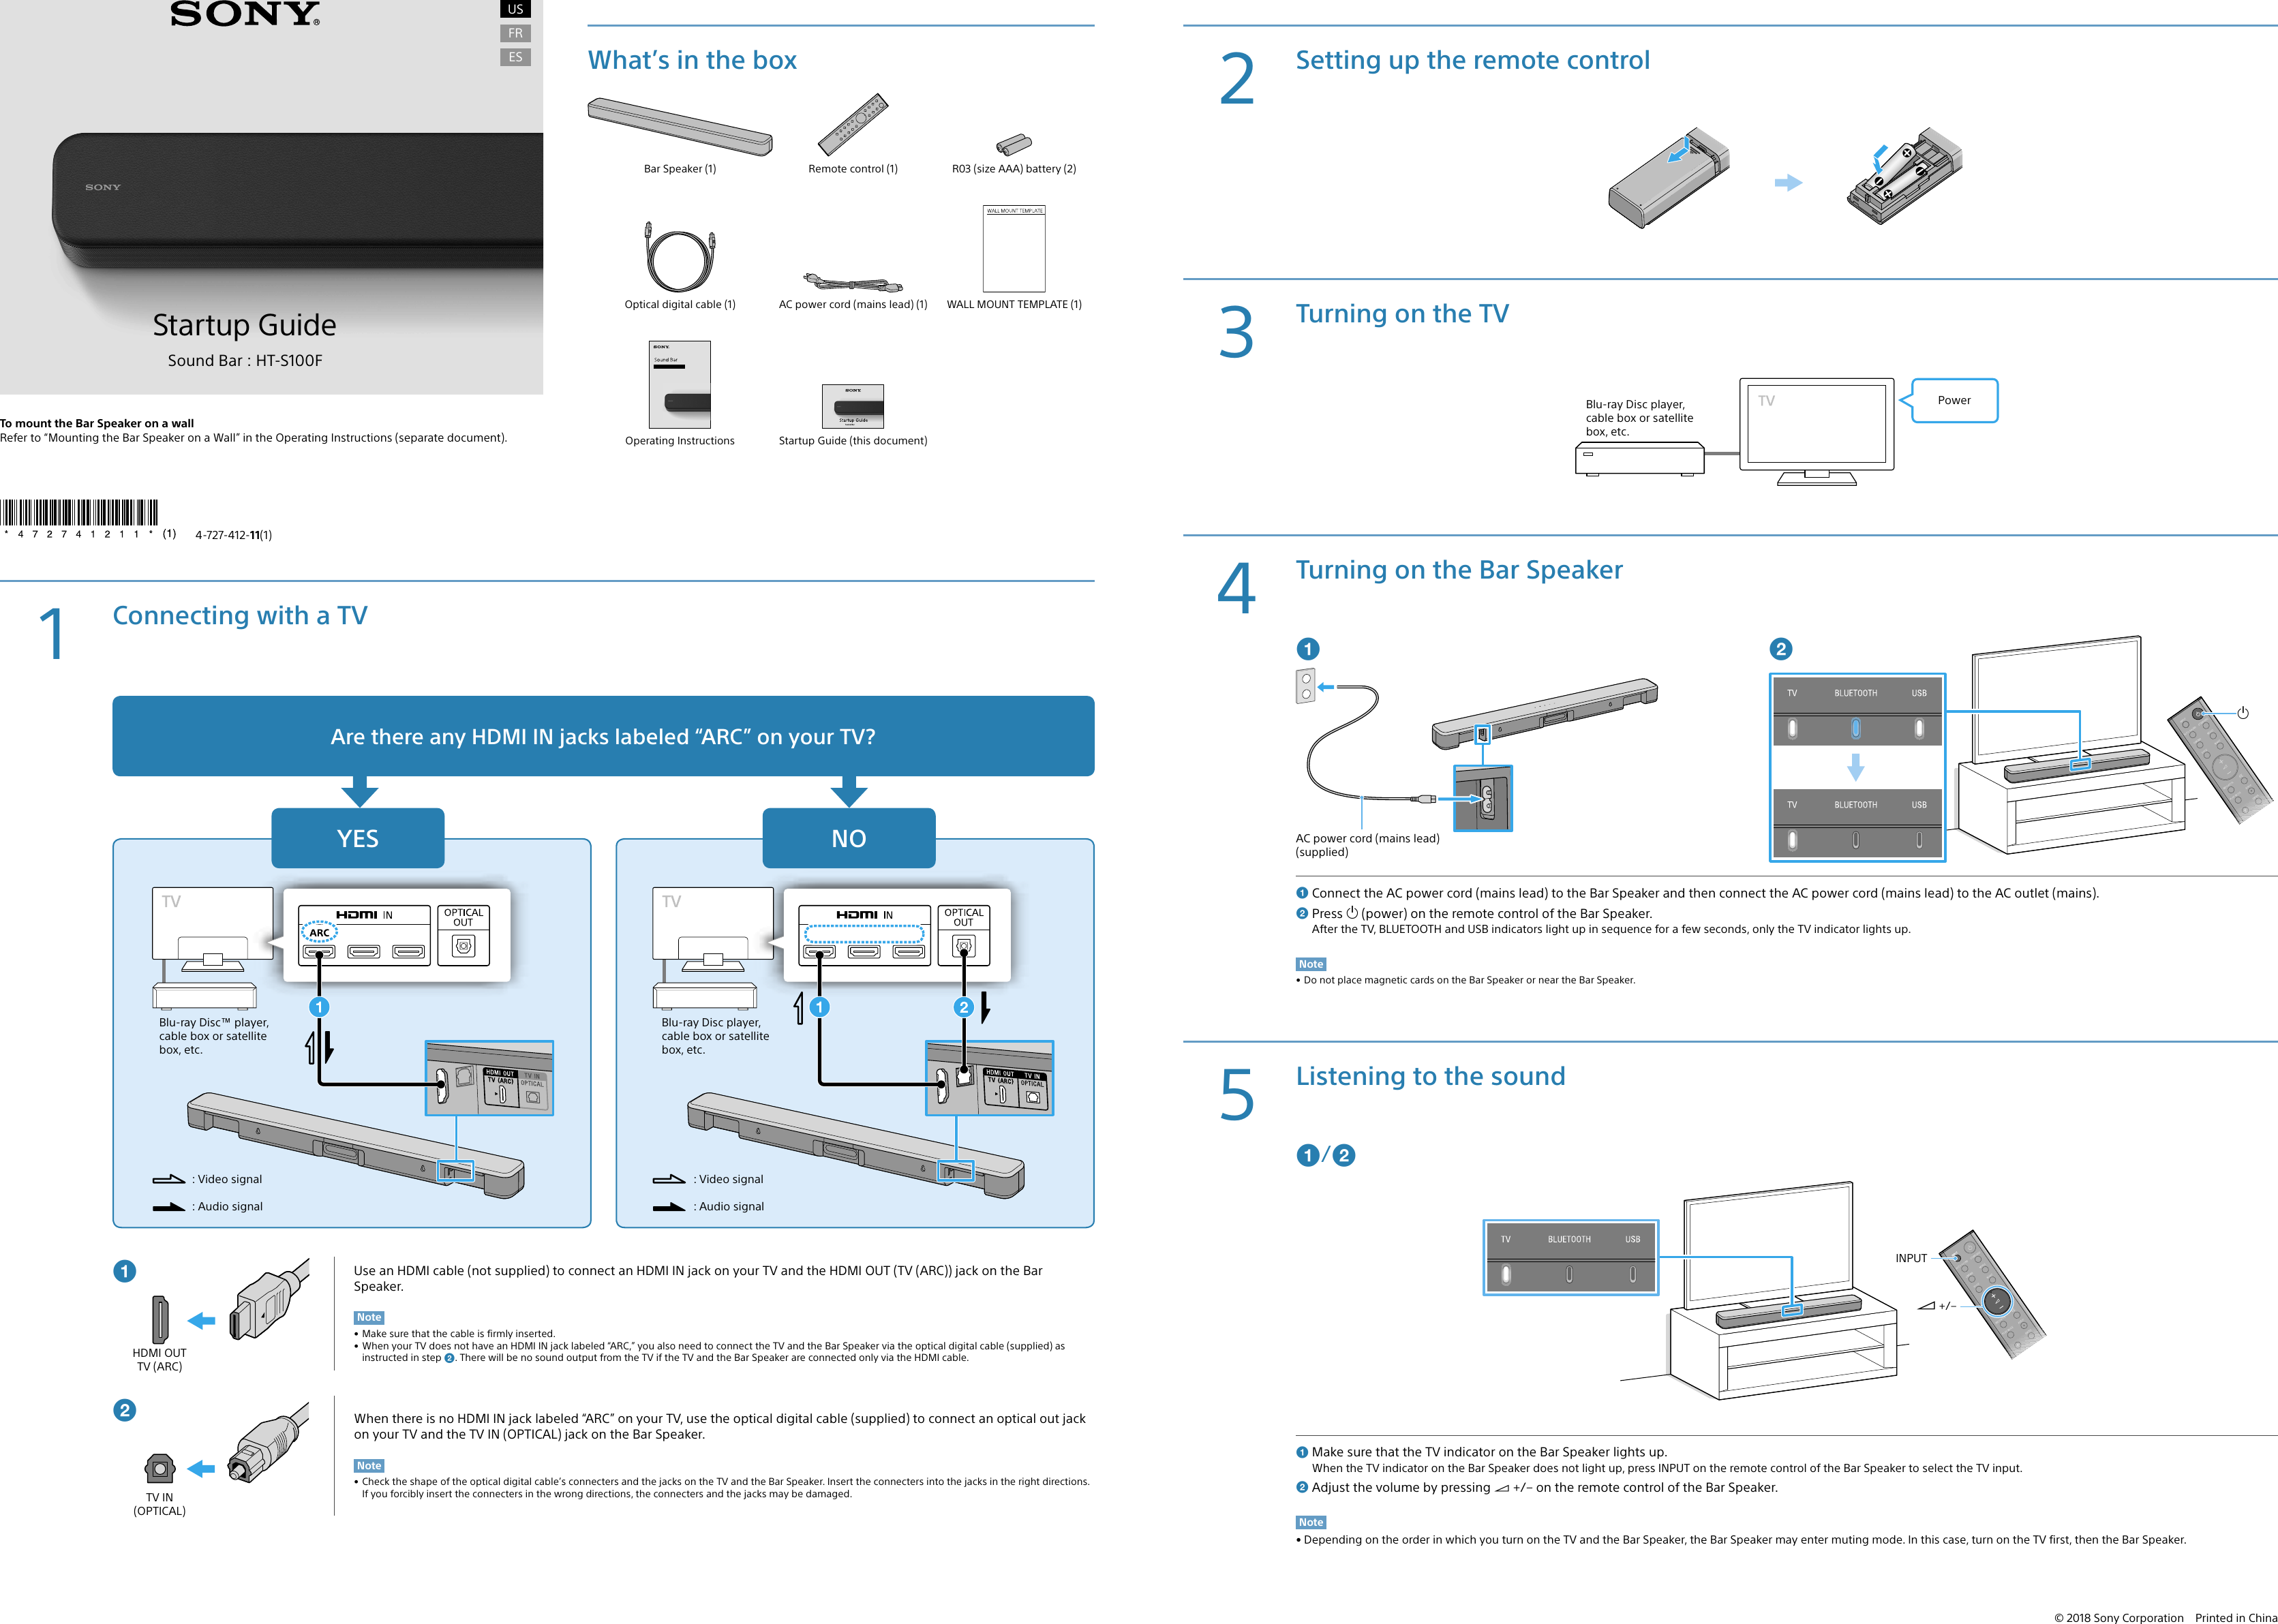 Page 1 of 2 - Sony HT-S100F User Manual Startup Guide Docget